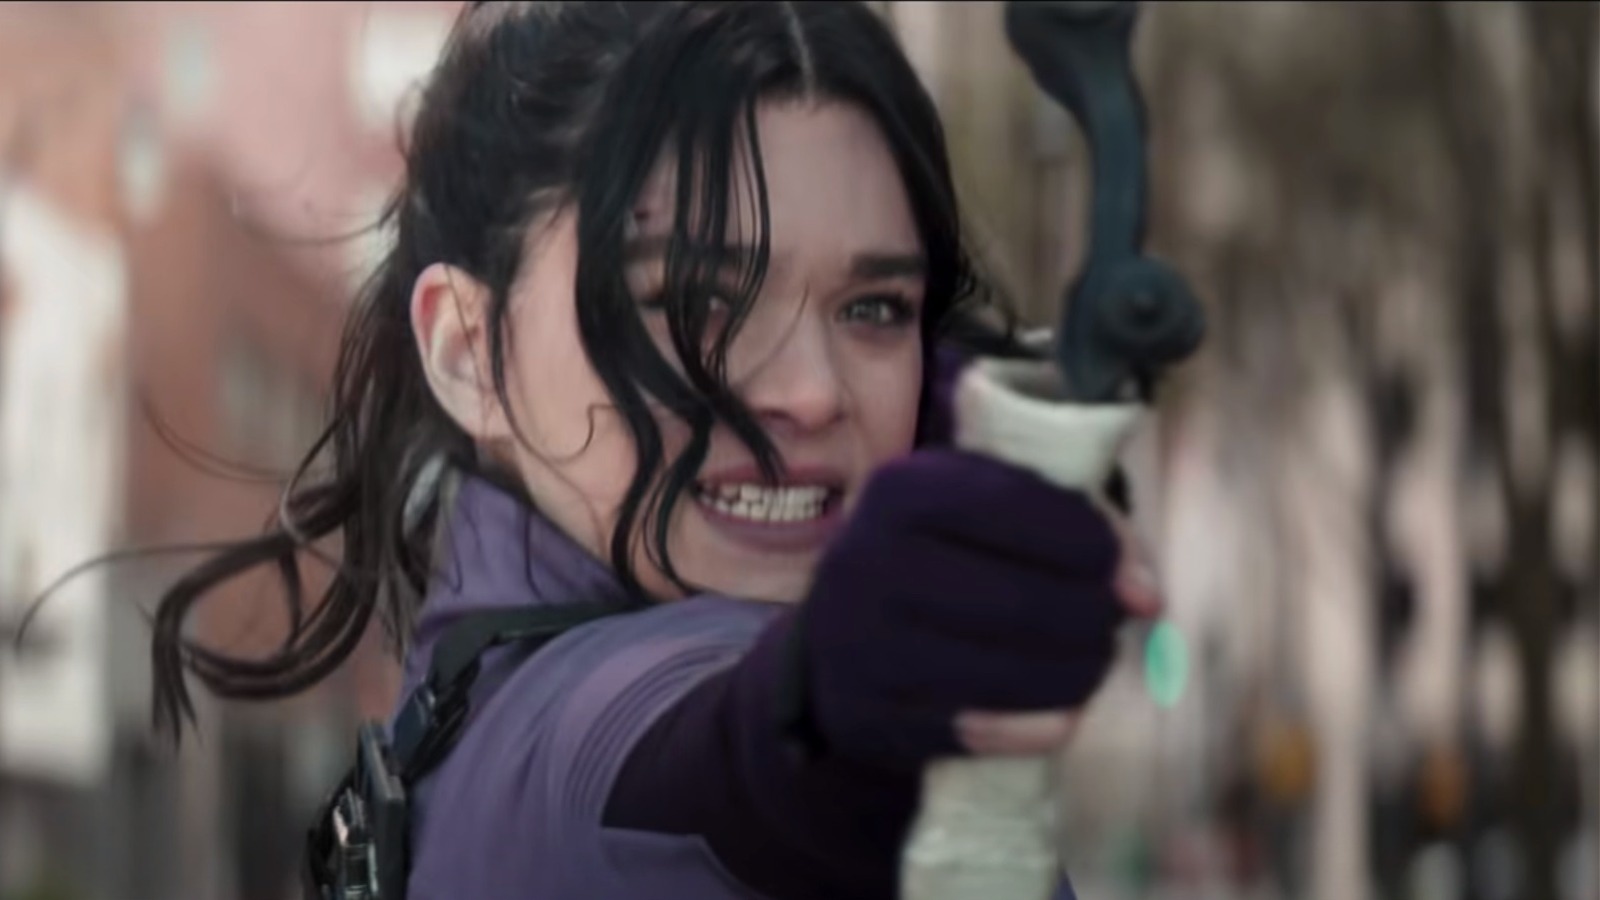 7. Kate Bishop She is athletic, enthusiastic, and a quick learner with a lot to learn! She learned how to flick a small object from Clint in a matter of days. Kate is wise but not perceptive enough. She misses that her mom is the criminal, doubting Jack instead. She learns a lot in her week with Hawkeye.